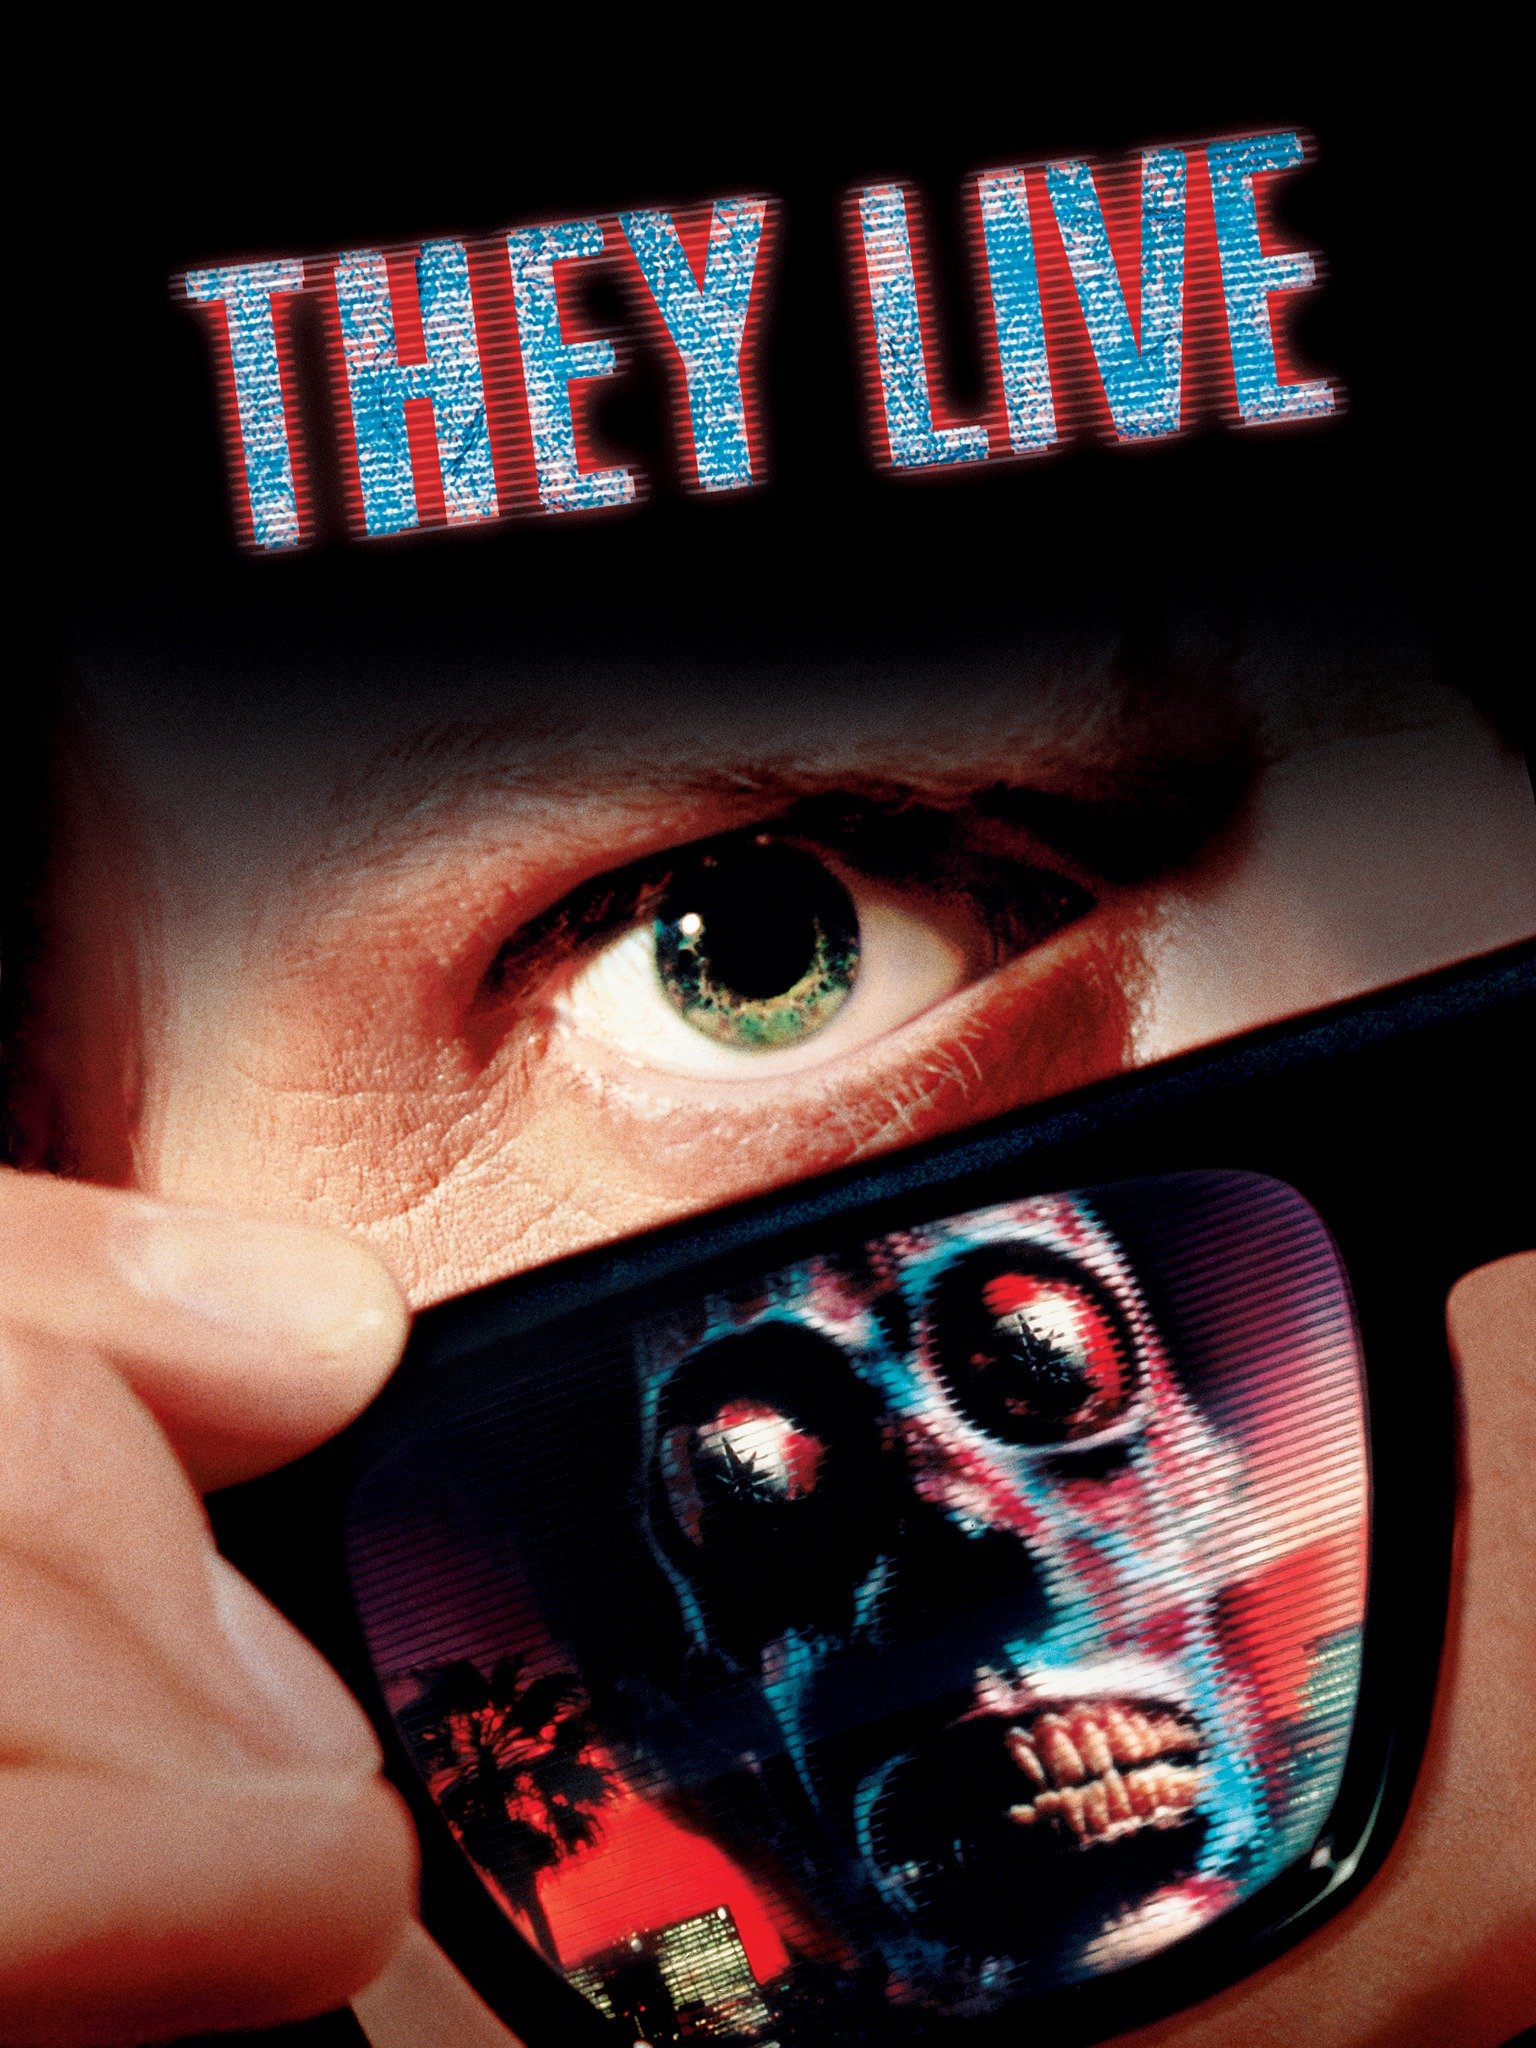 They lives или they live. Чужие среди нас 1988. Чужие среди нас 2.